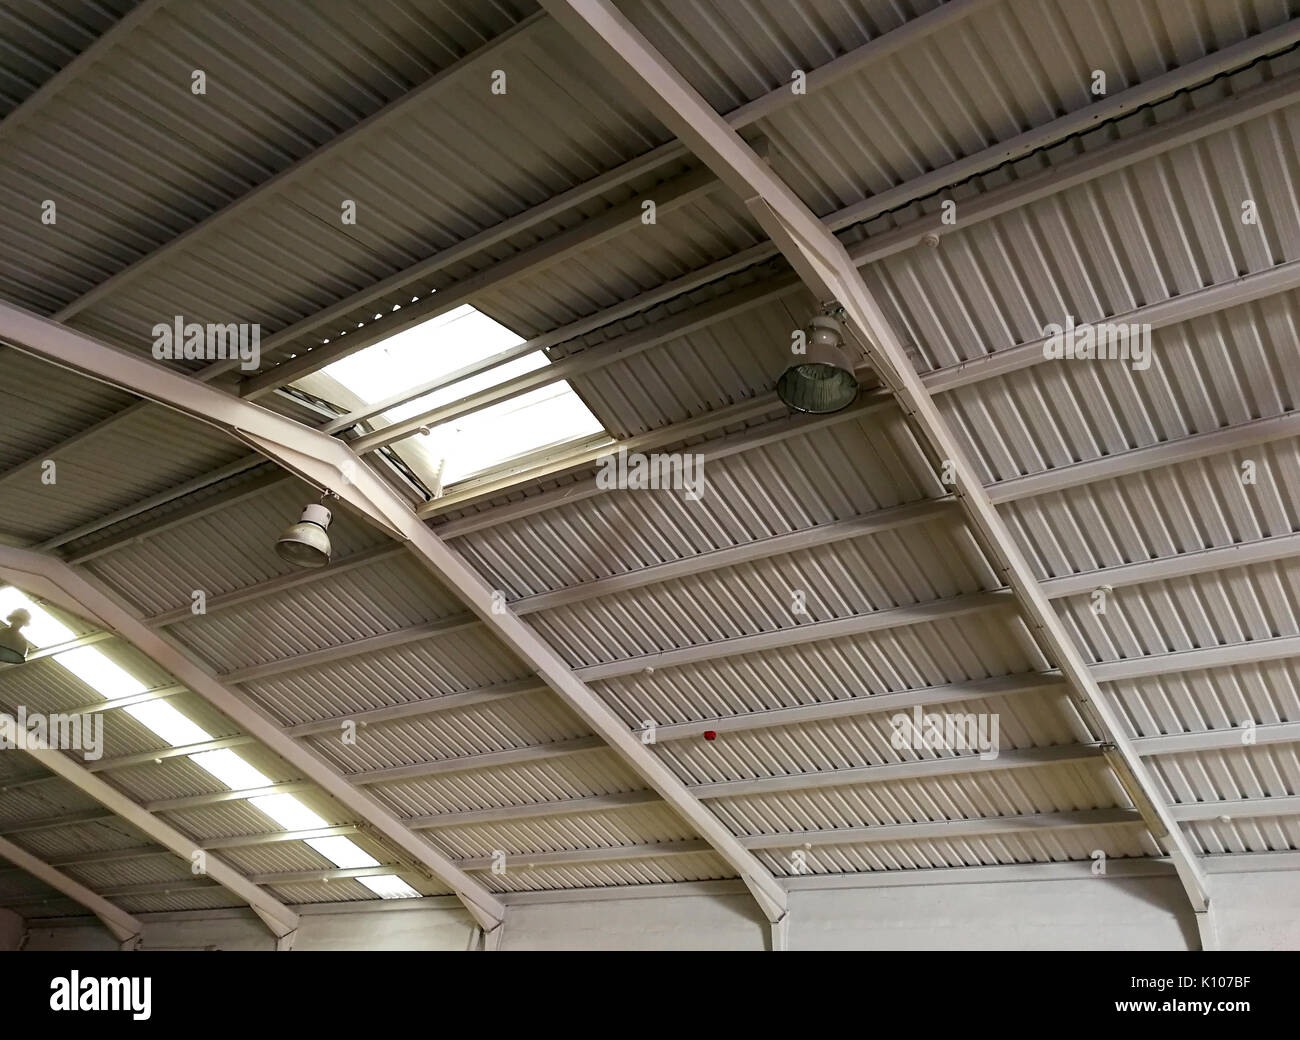 Roof with skylights in industrial building Stock Photo - Alamy